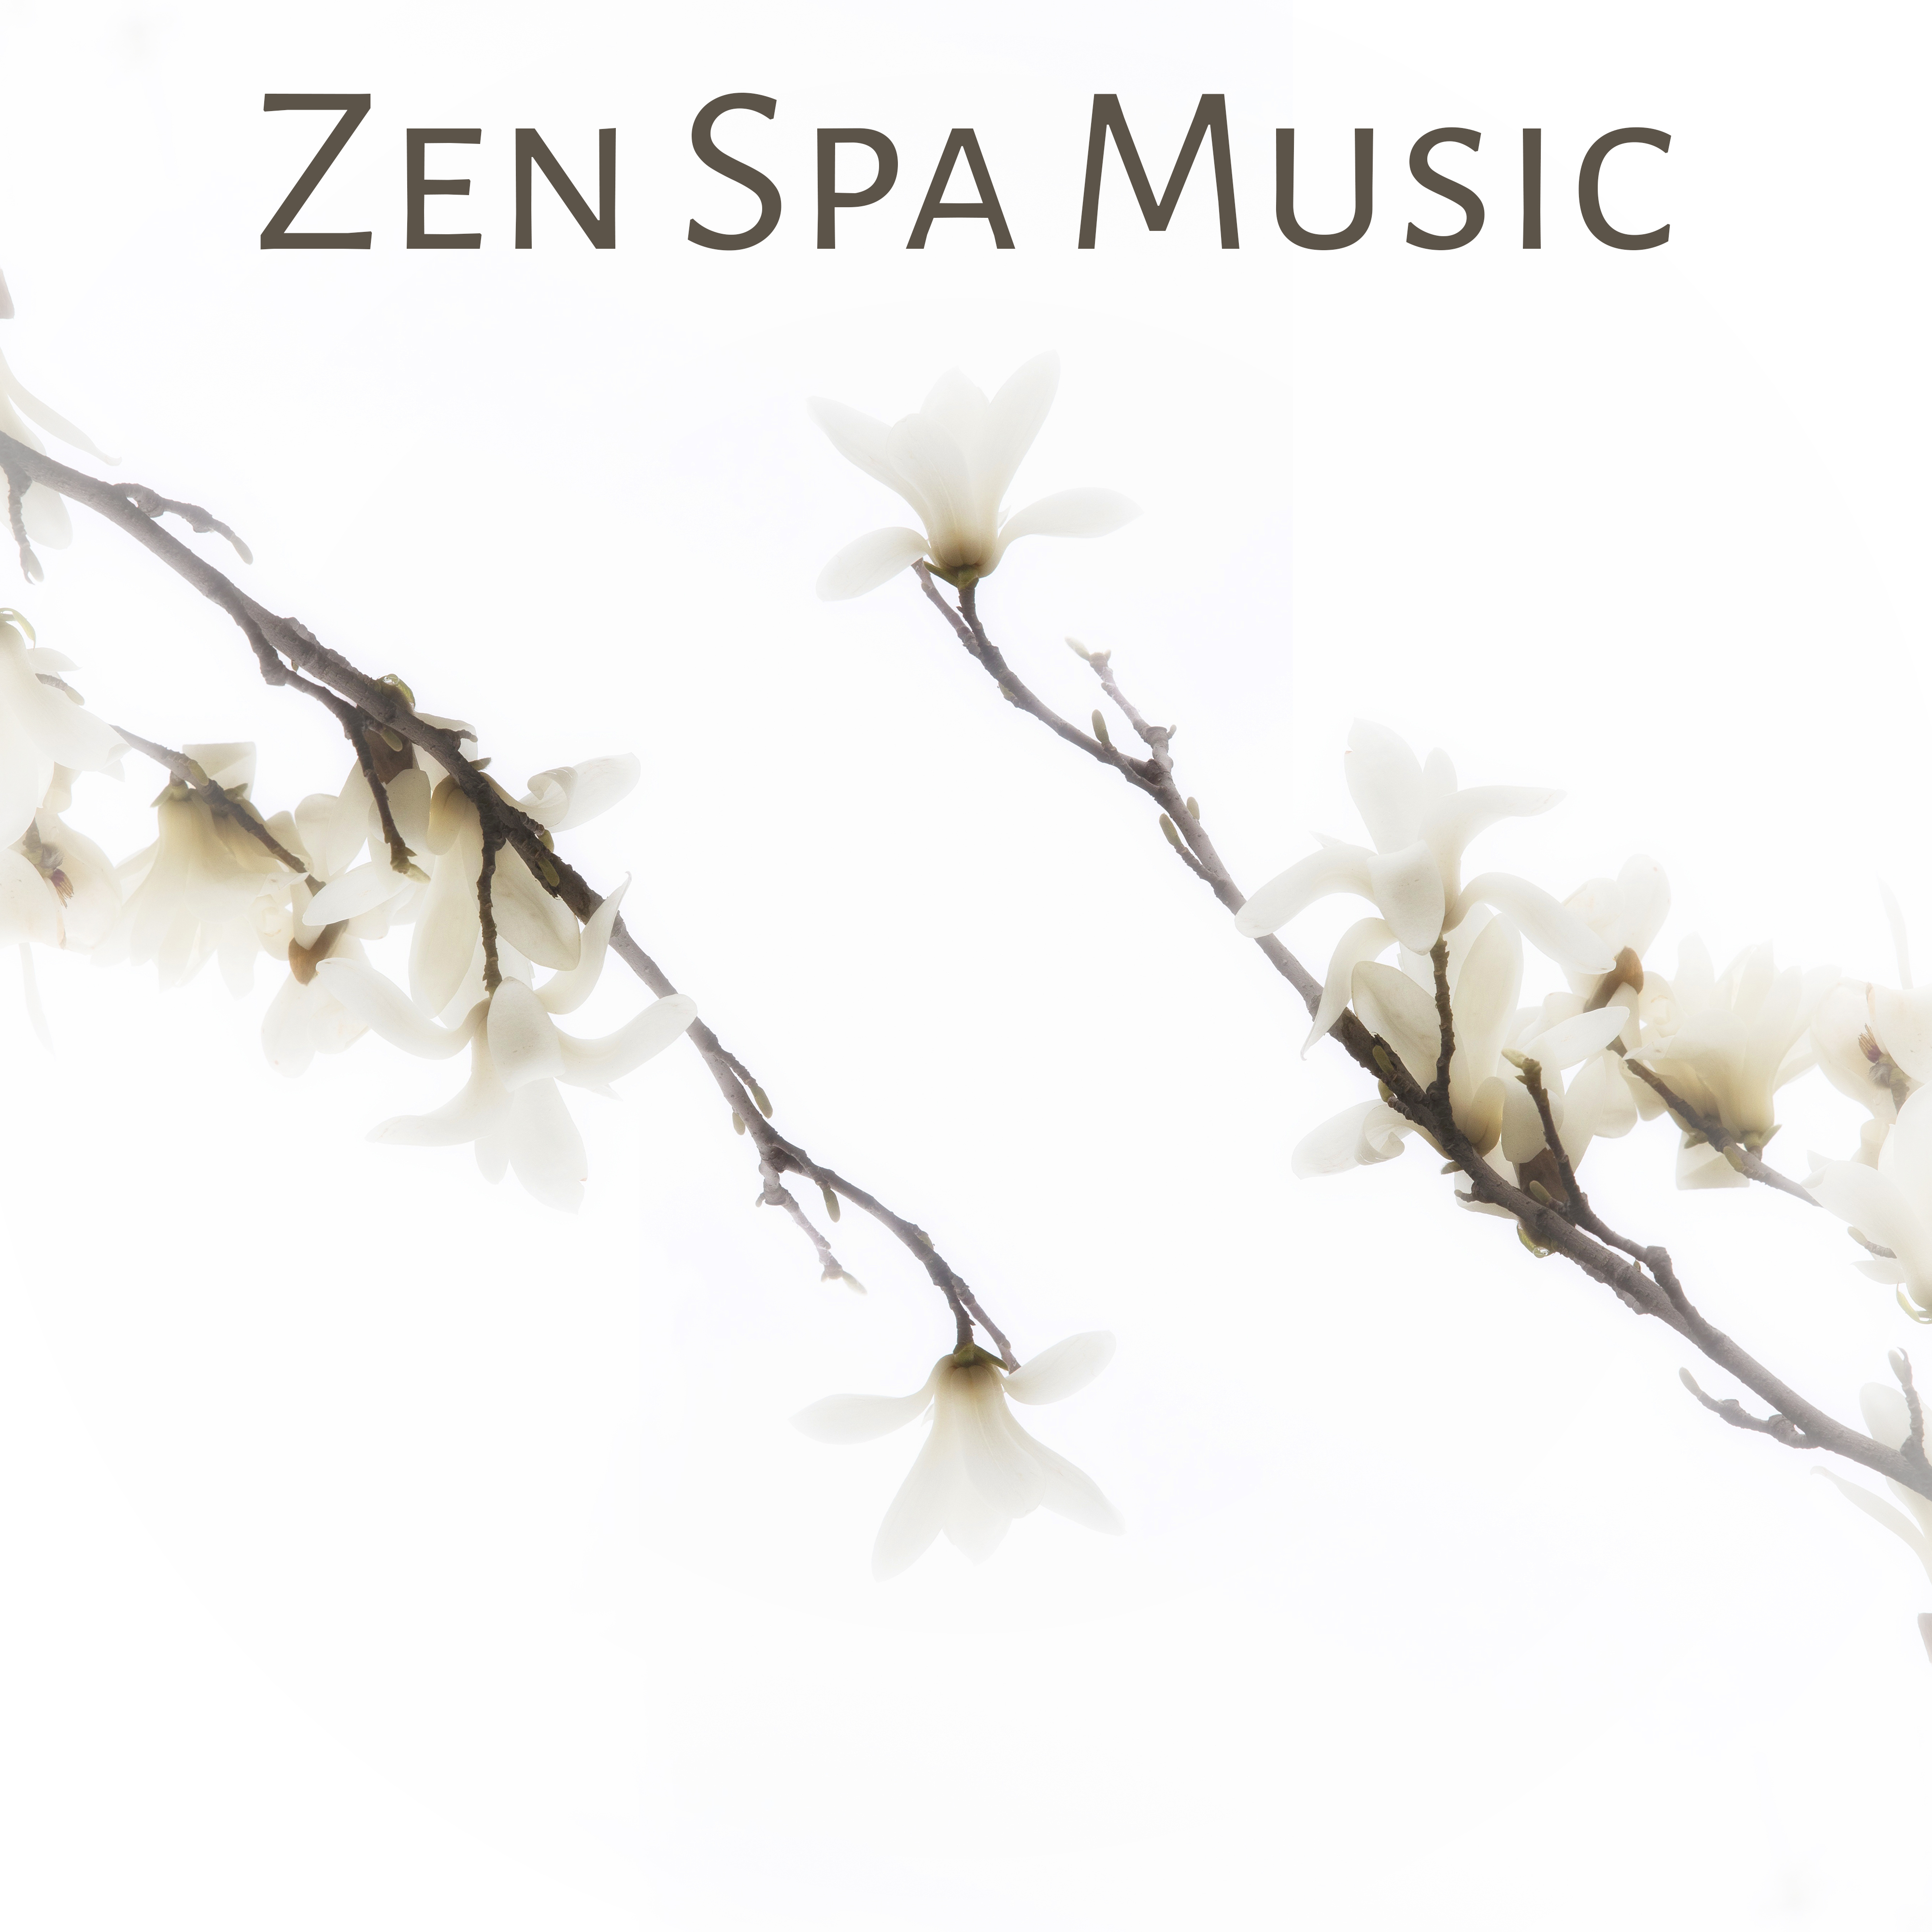 Zen Spa Music – Calming Sounds for Spa Relaxation, Beautiful Moments, Music to Help Rest, Nature Healing